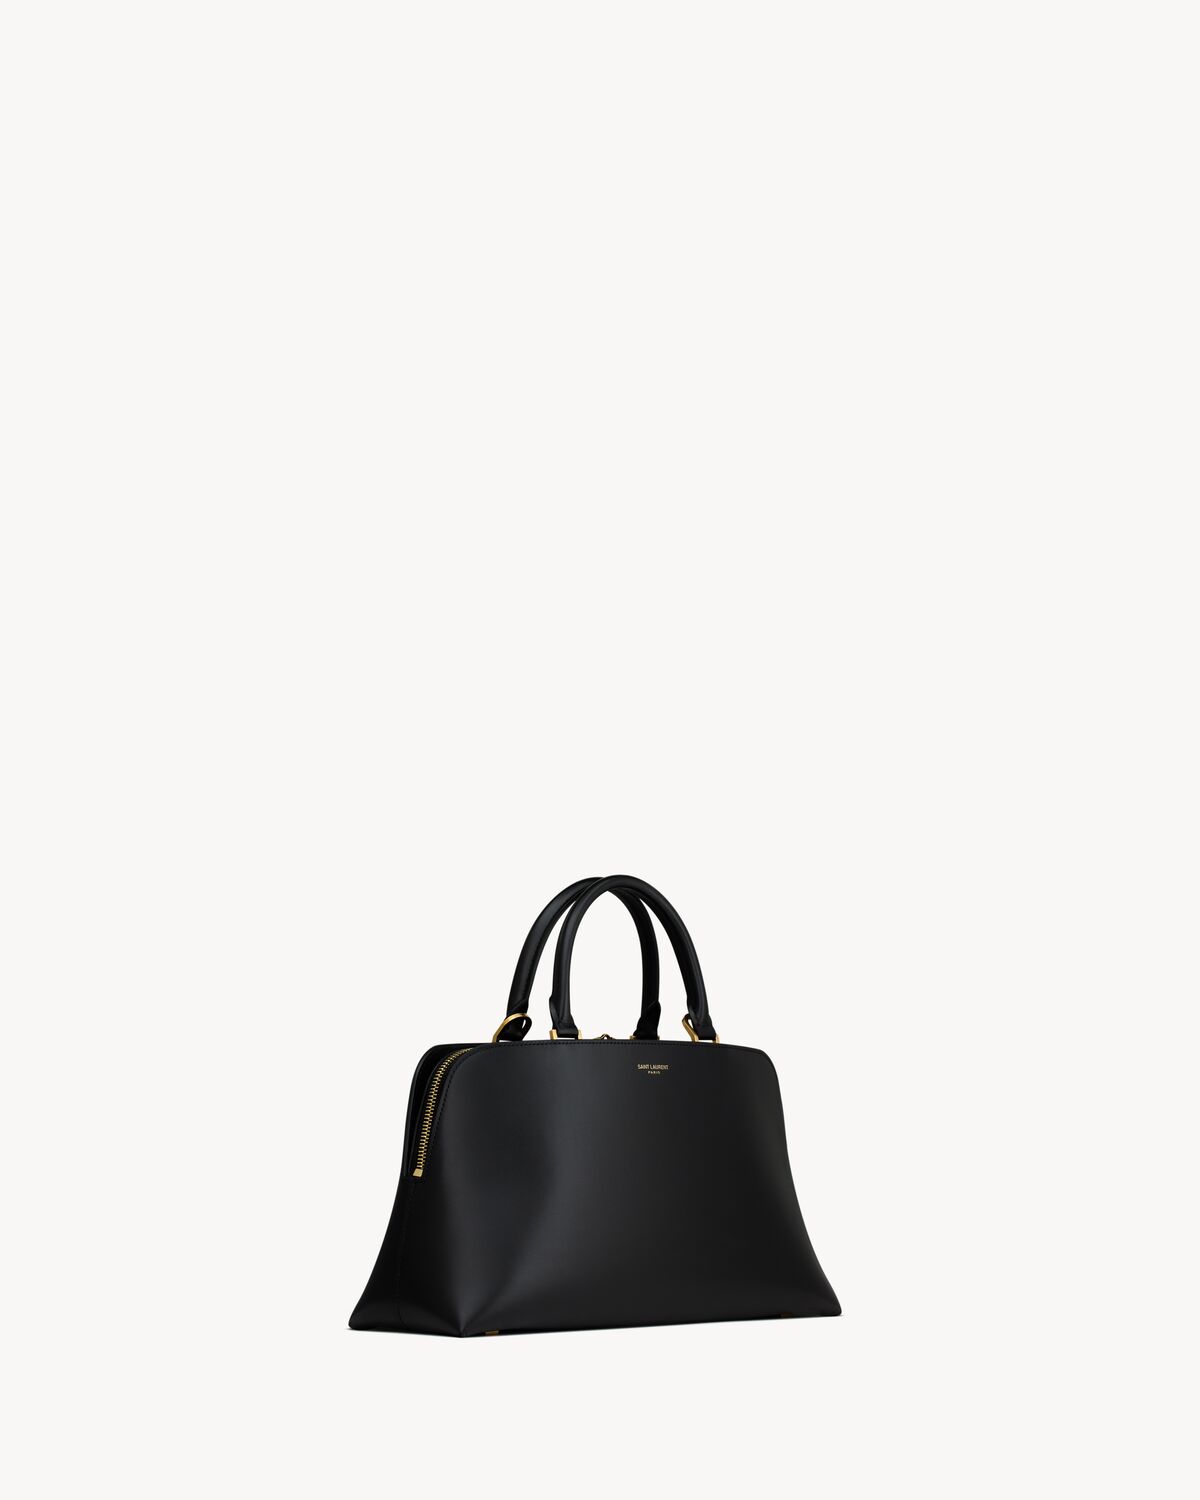 SAC DE JOUR small duffle in shiny leather